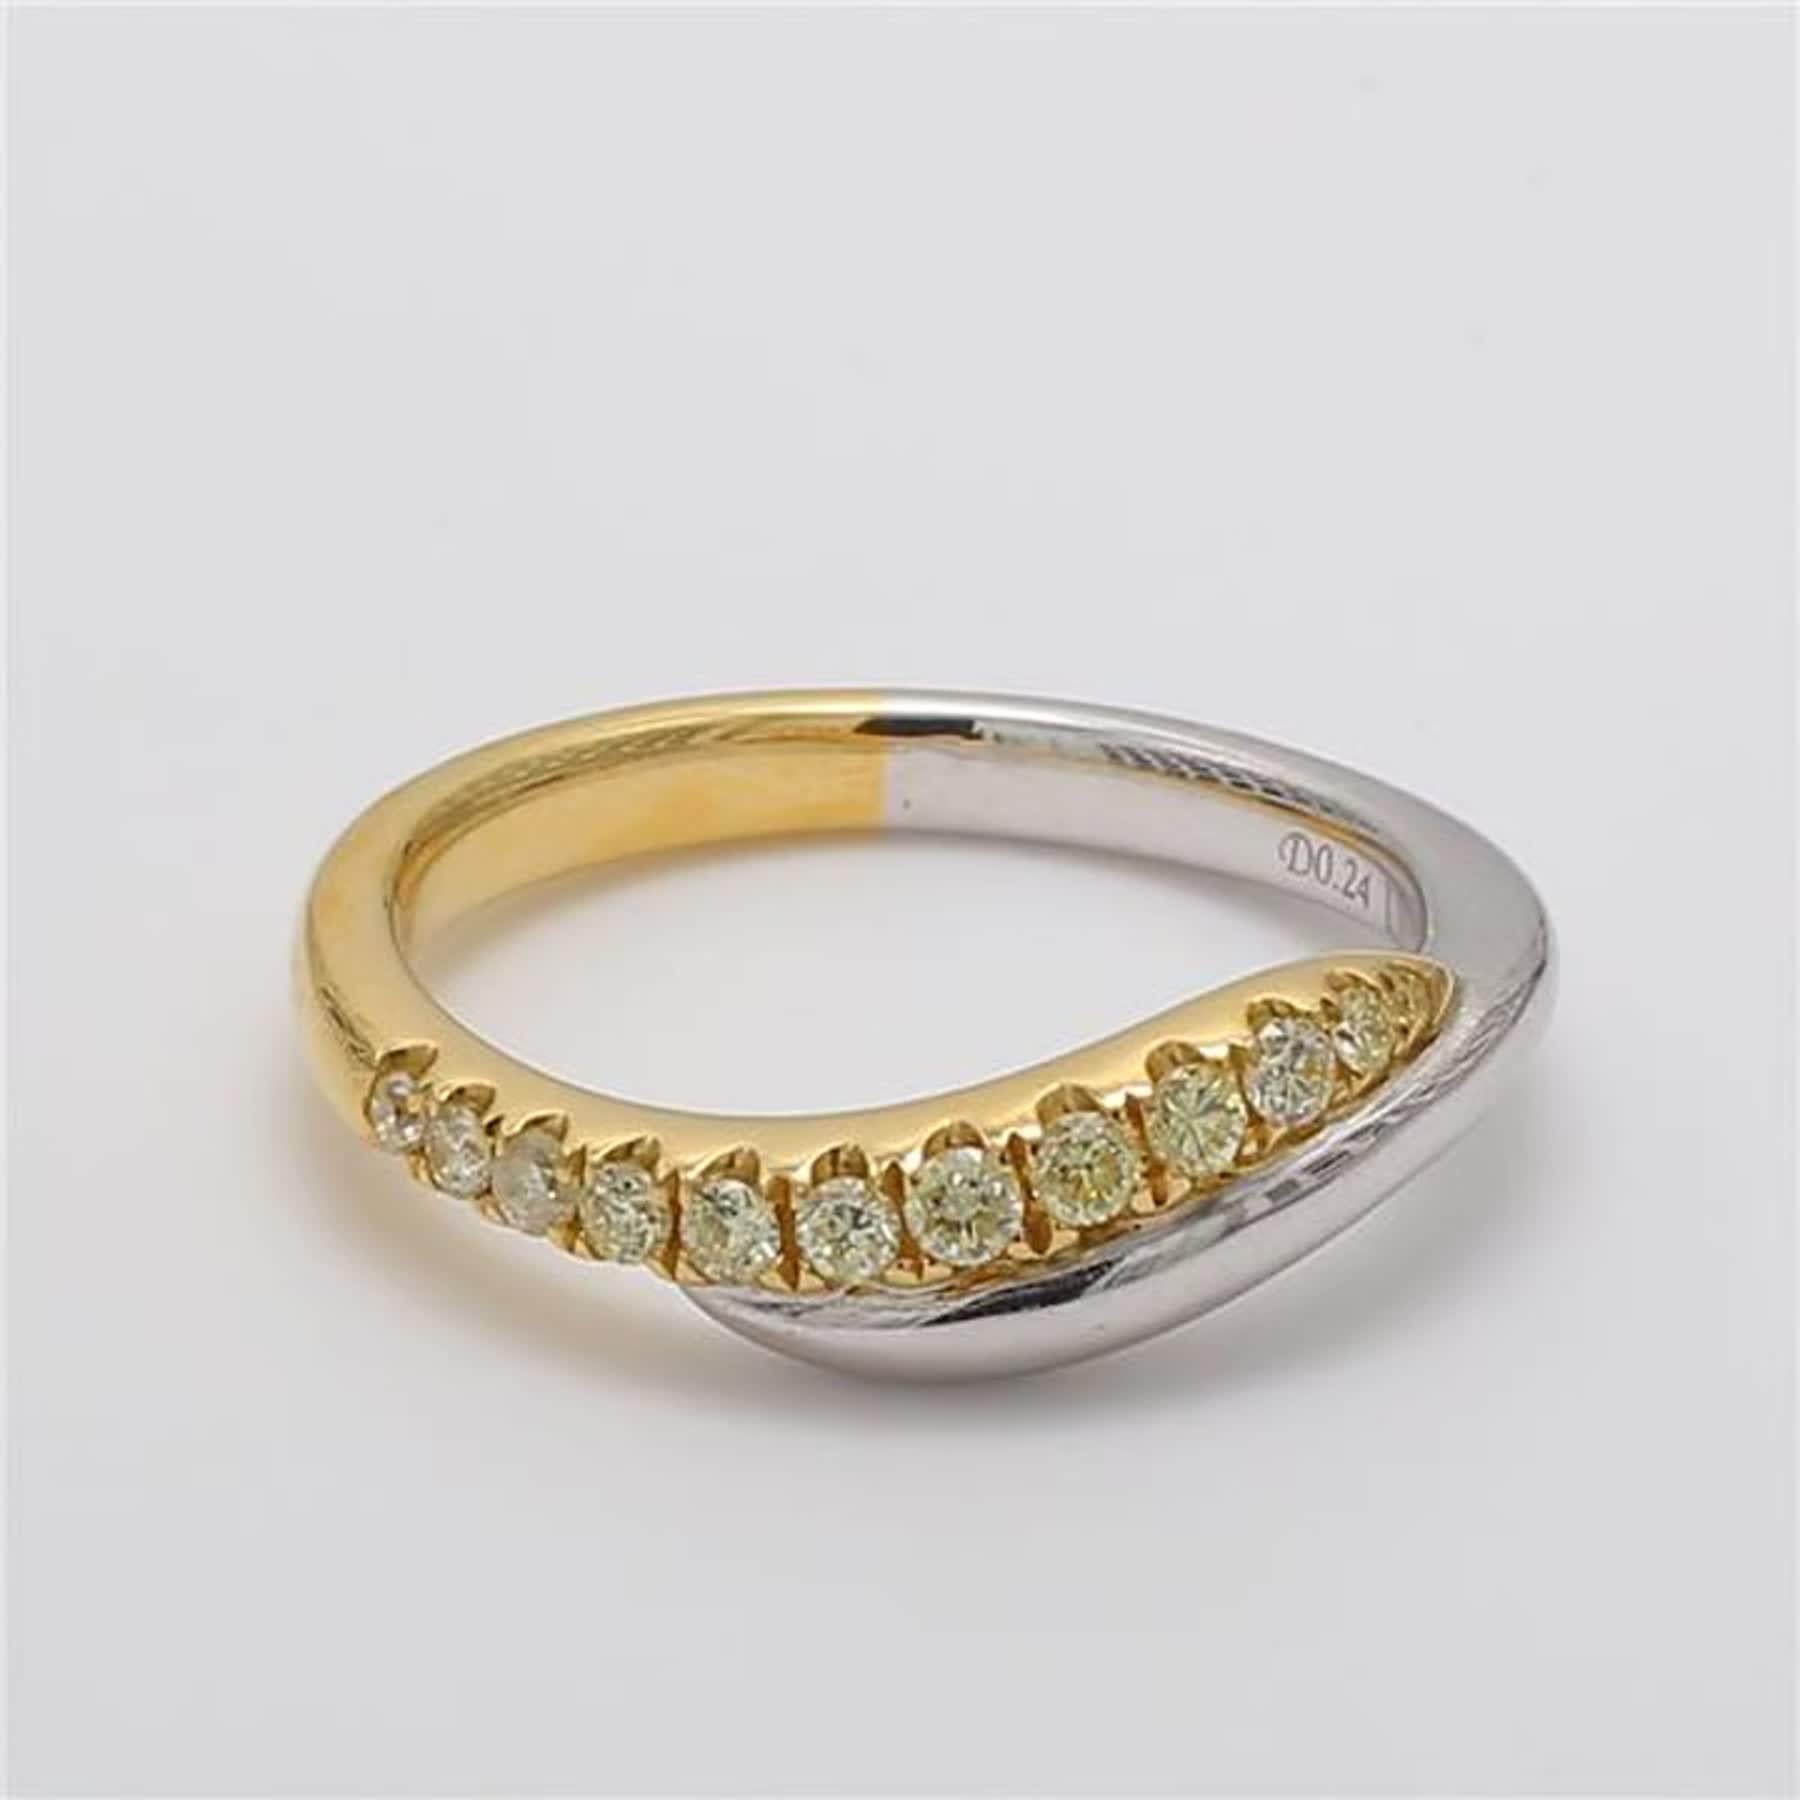 Rare round natural yellow diamond band. This ring is designed to be in a simple setting. Can be used as a wedding band or in addition to your collection of jewels.

Total Weight: .24cts

Stone Measurements: approximately 1.75mm

Natural Round Yellow